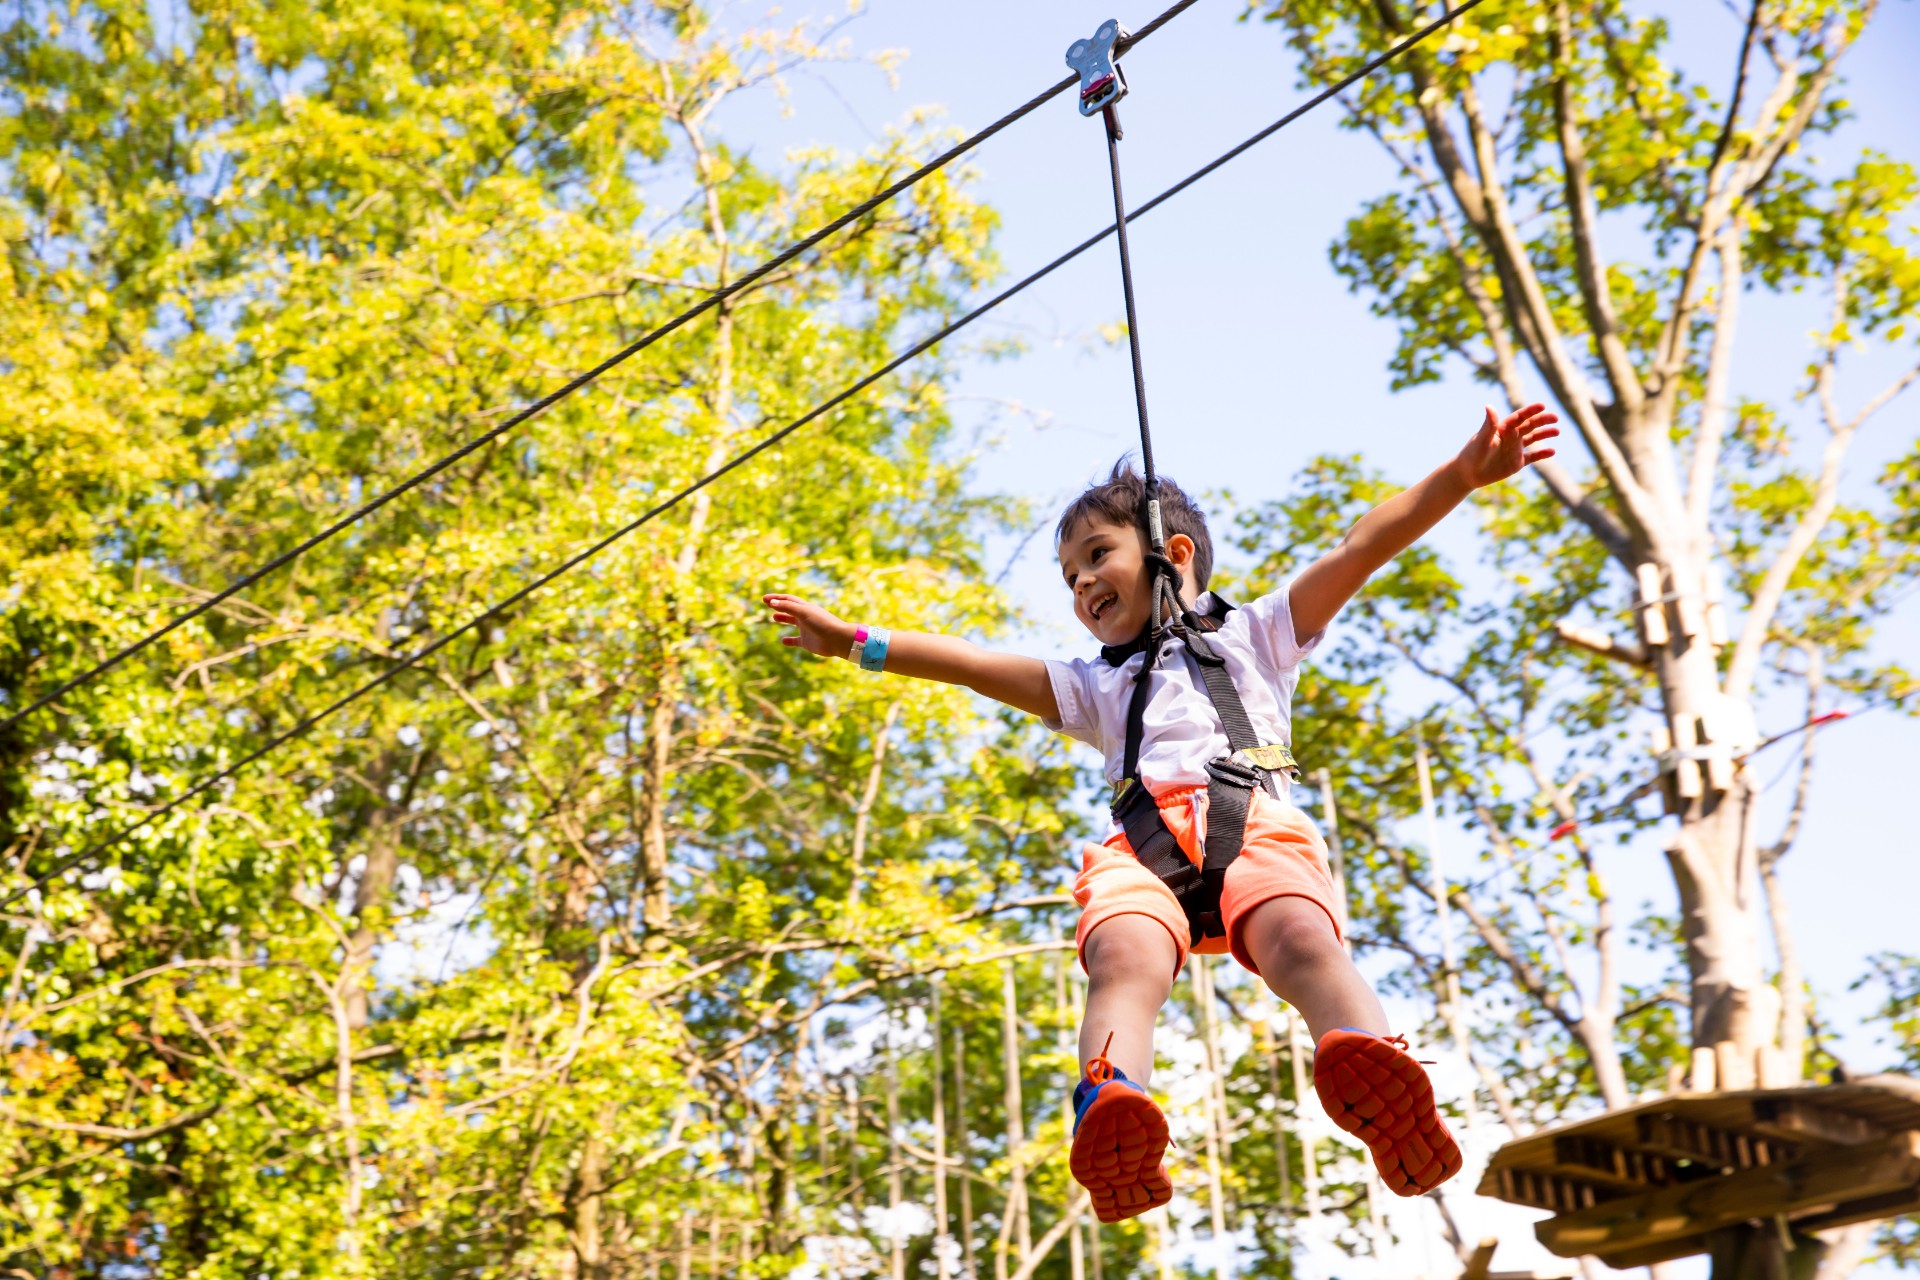 High Ropes For Kids In Alexandra Palace London Go Ape